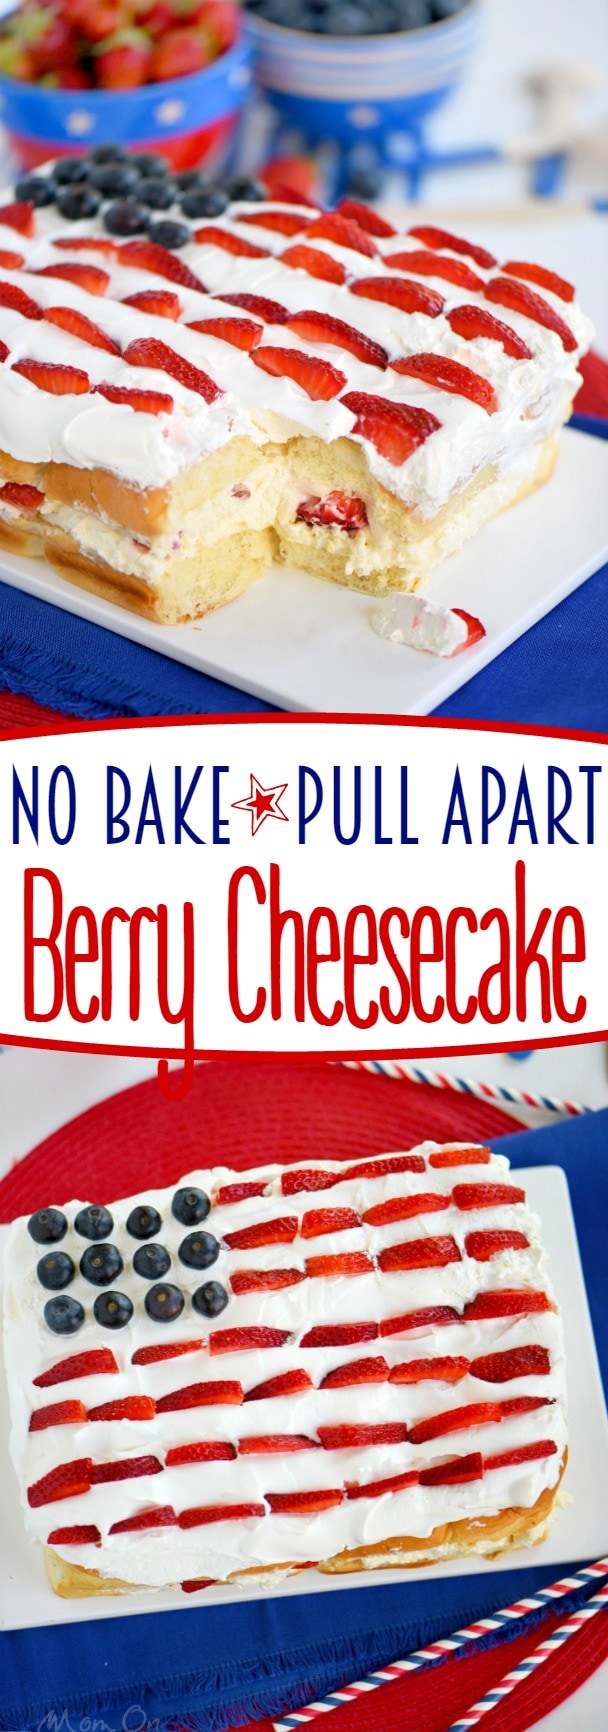 This delightful No Bake Pull Apart Berry Cheesecake takes about 10 minutes to make - start to finish! A delicious and easy dessert recipe that's perfect for the 4th of July and all your BBQ and potluck needs!